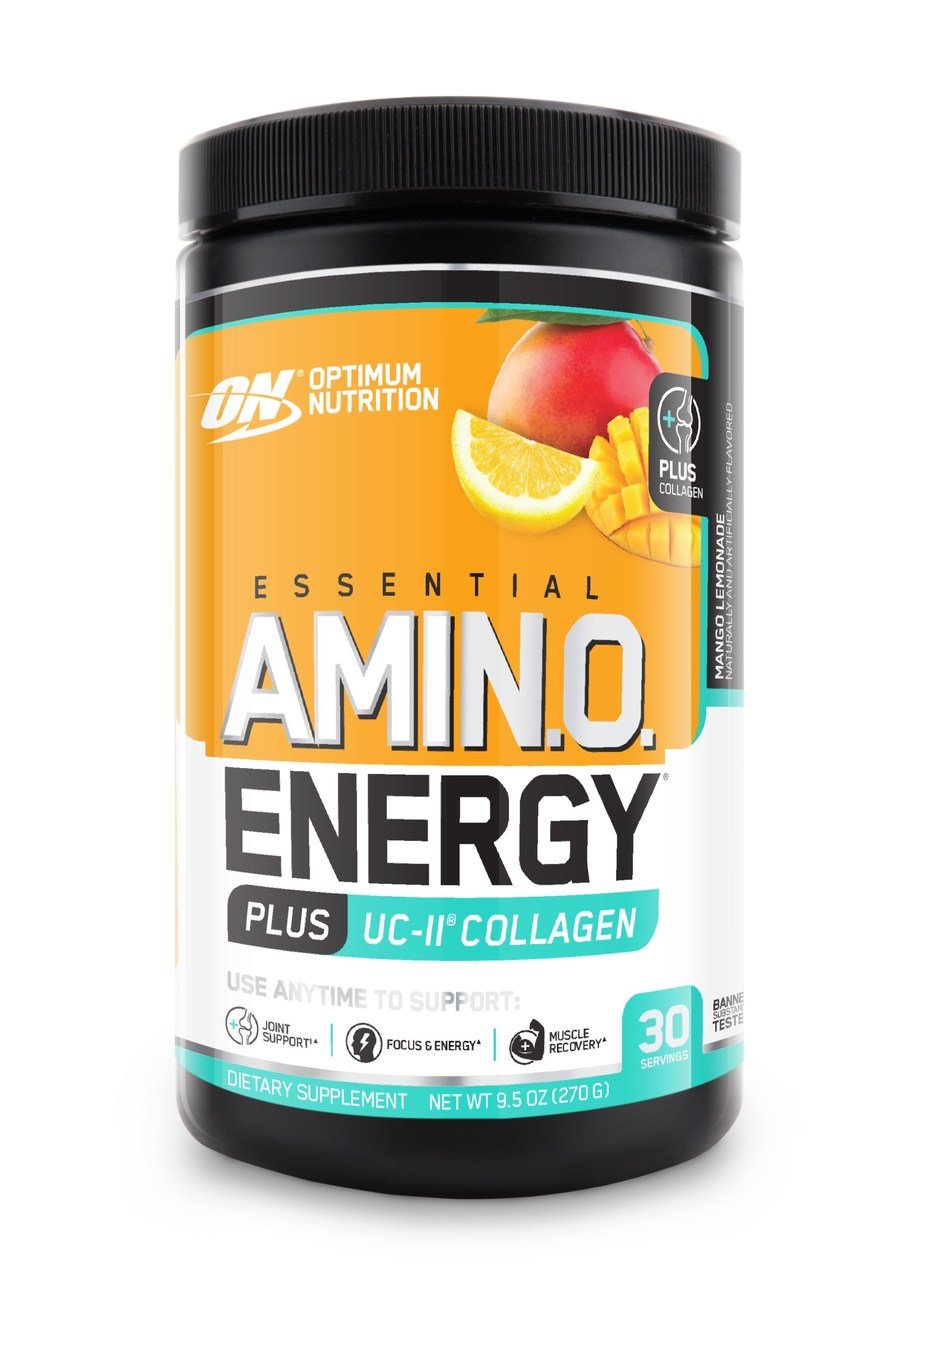 on-launches-new-essential-amin-o-energy-plus-uc-ii-collagen